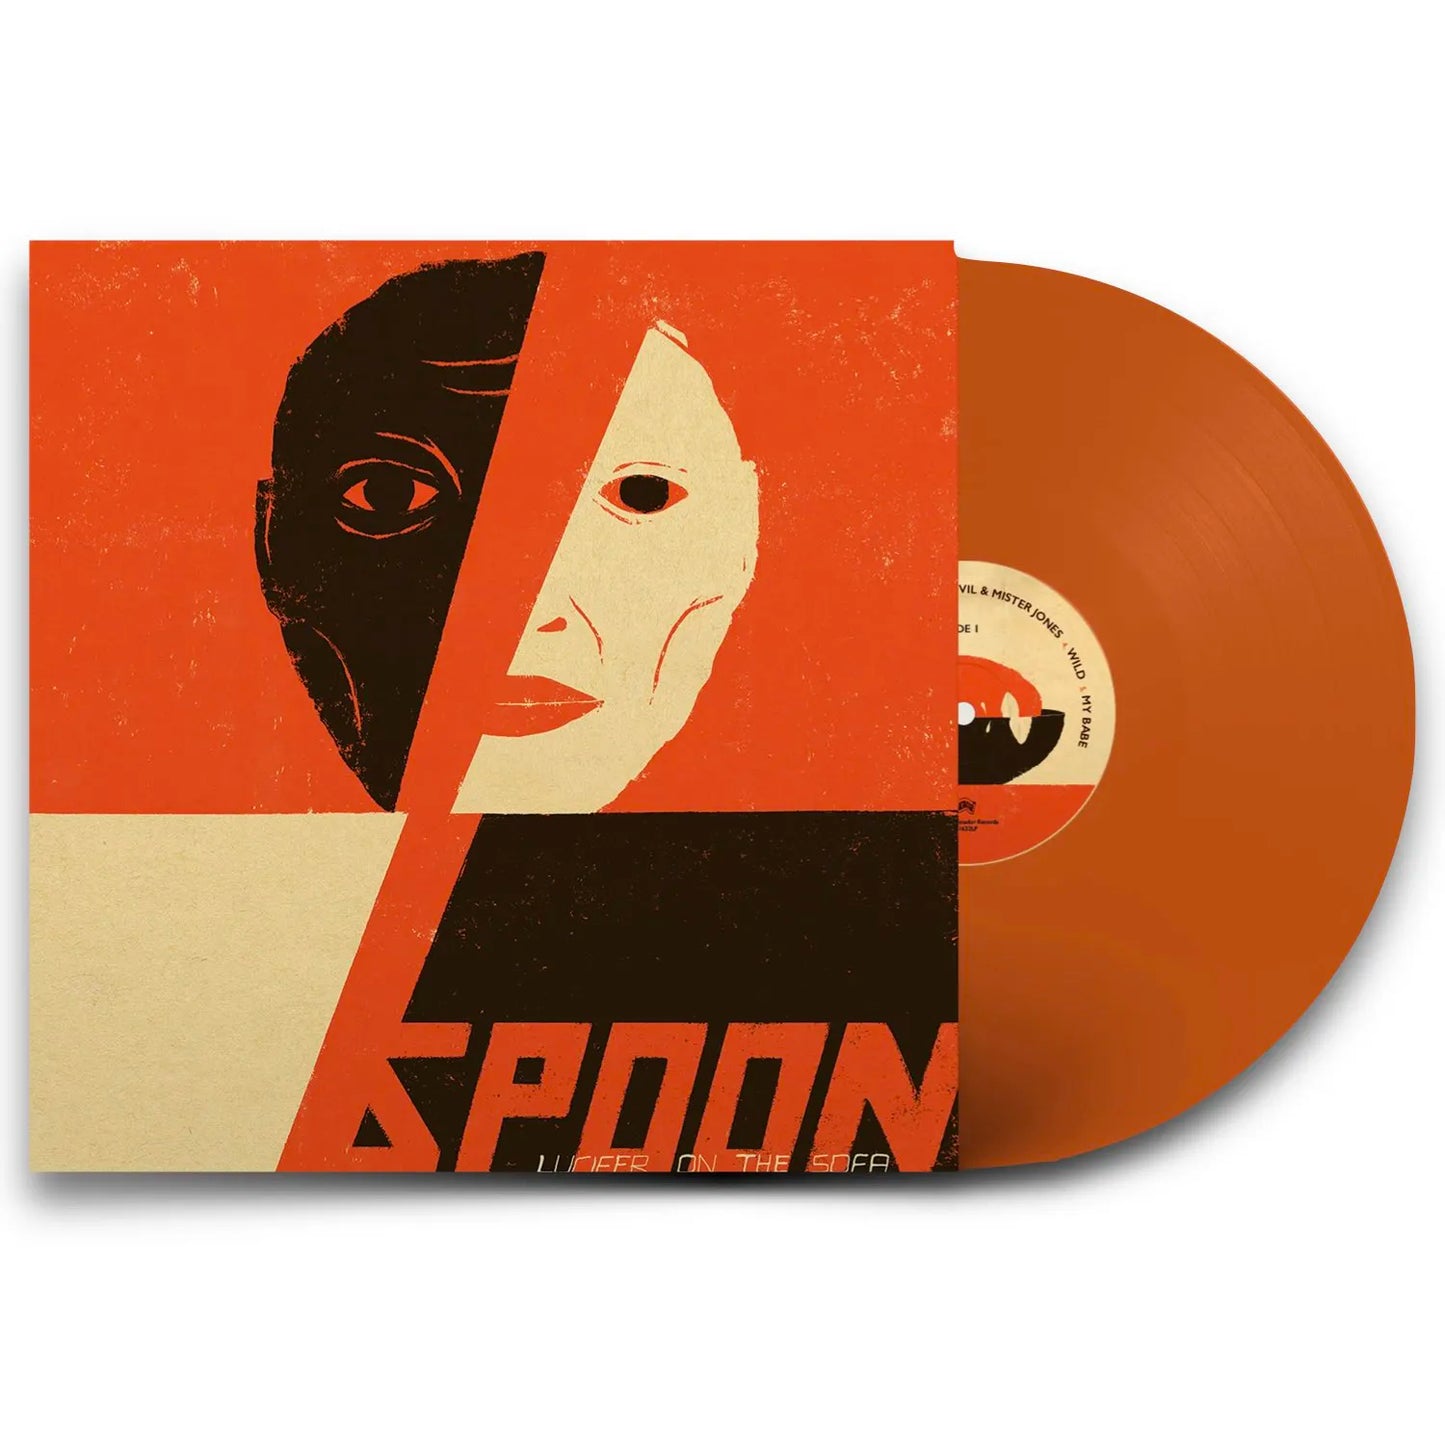 Spoon - Lucifer On The Sofa (Limited Edition on Opaque Orange Vinyl)